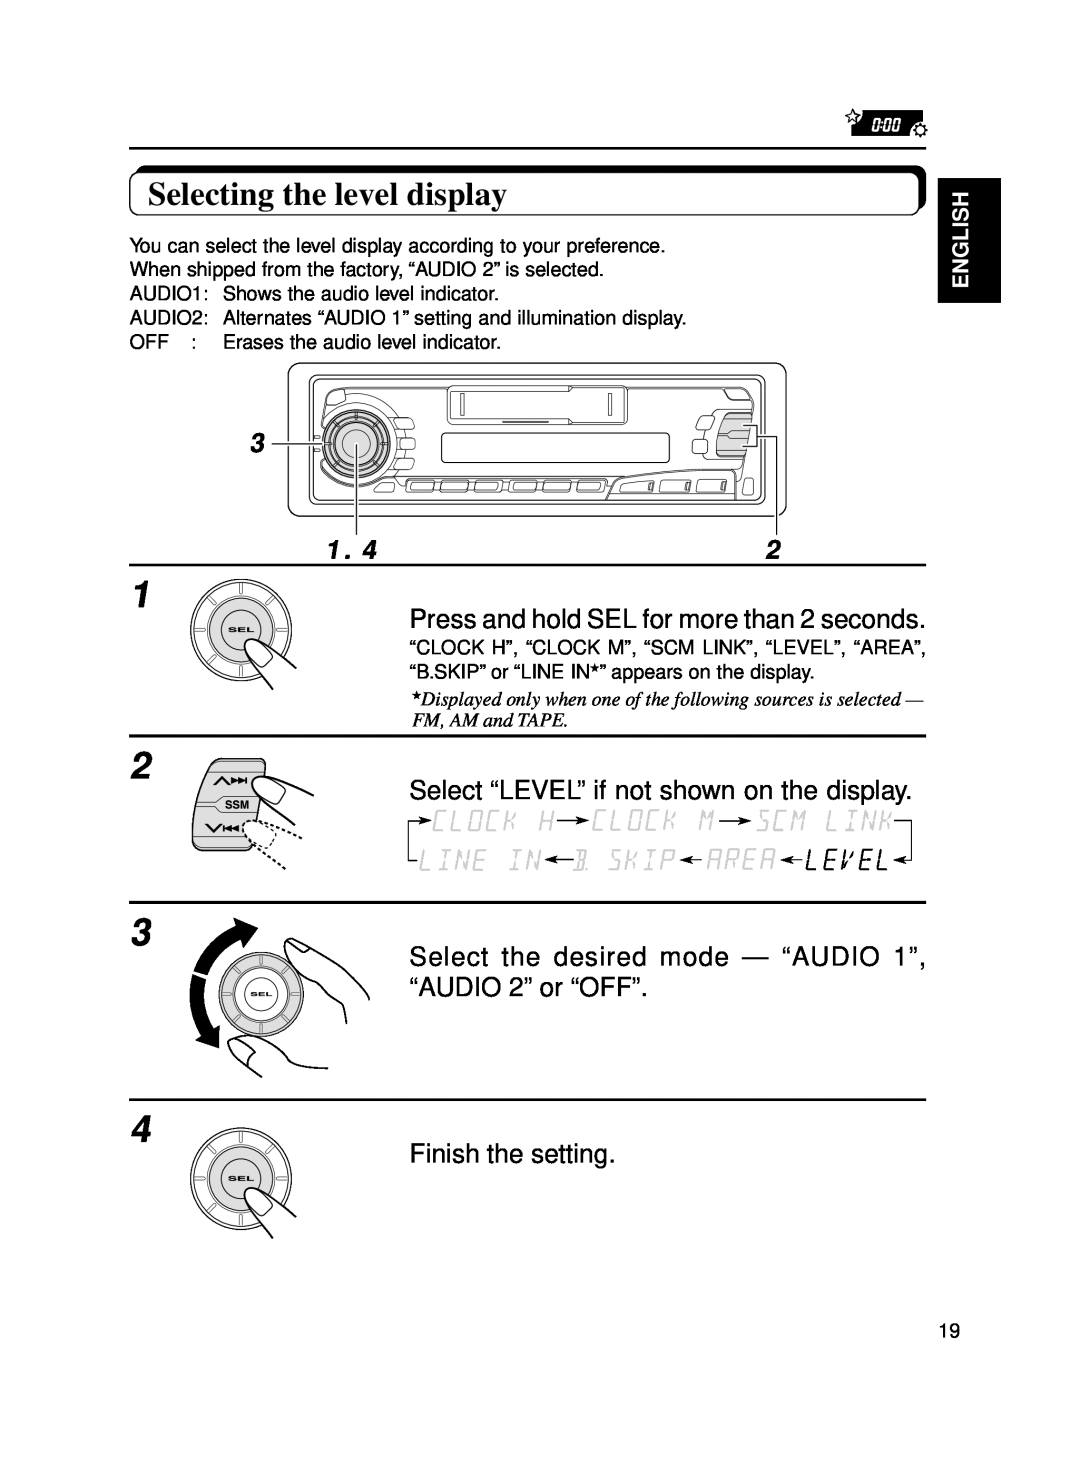 JVC KS-FX250 manual Selecting the level display, Select “LEVEL” if not shown on the display, Finish the setting, English 